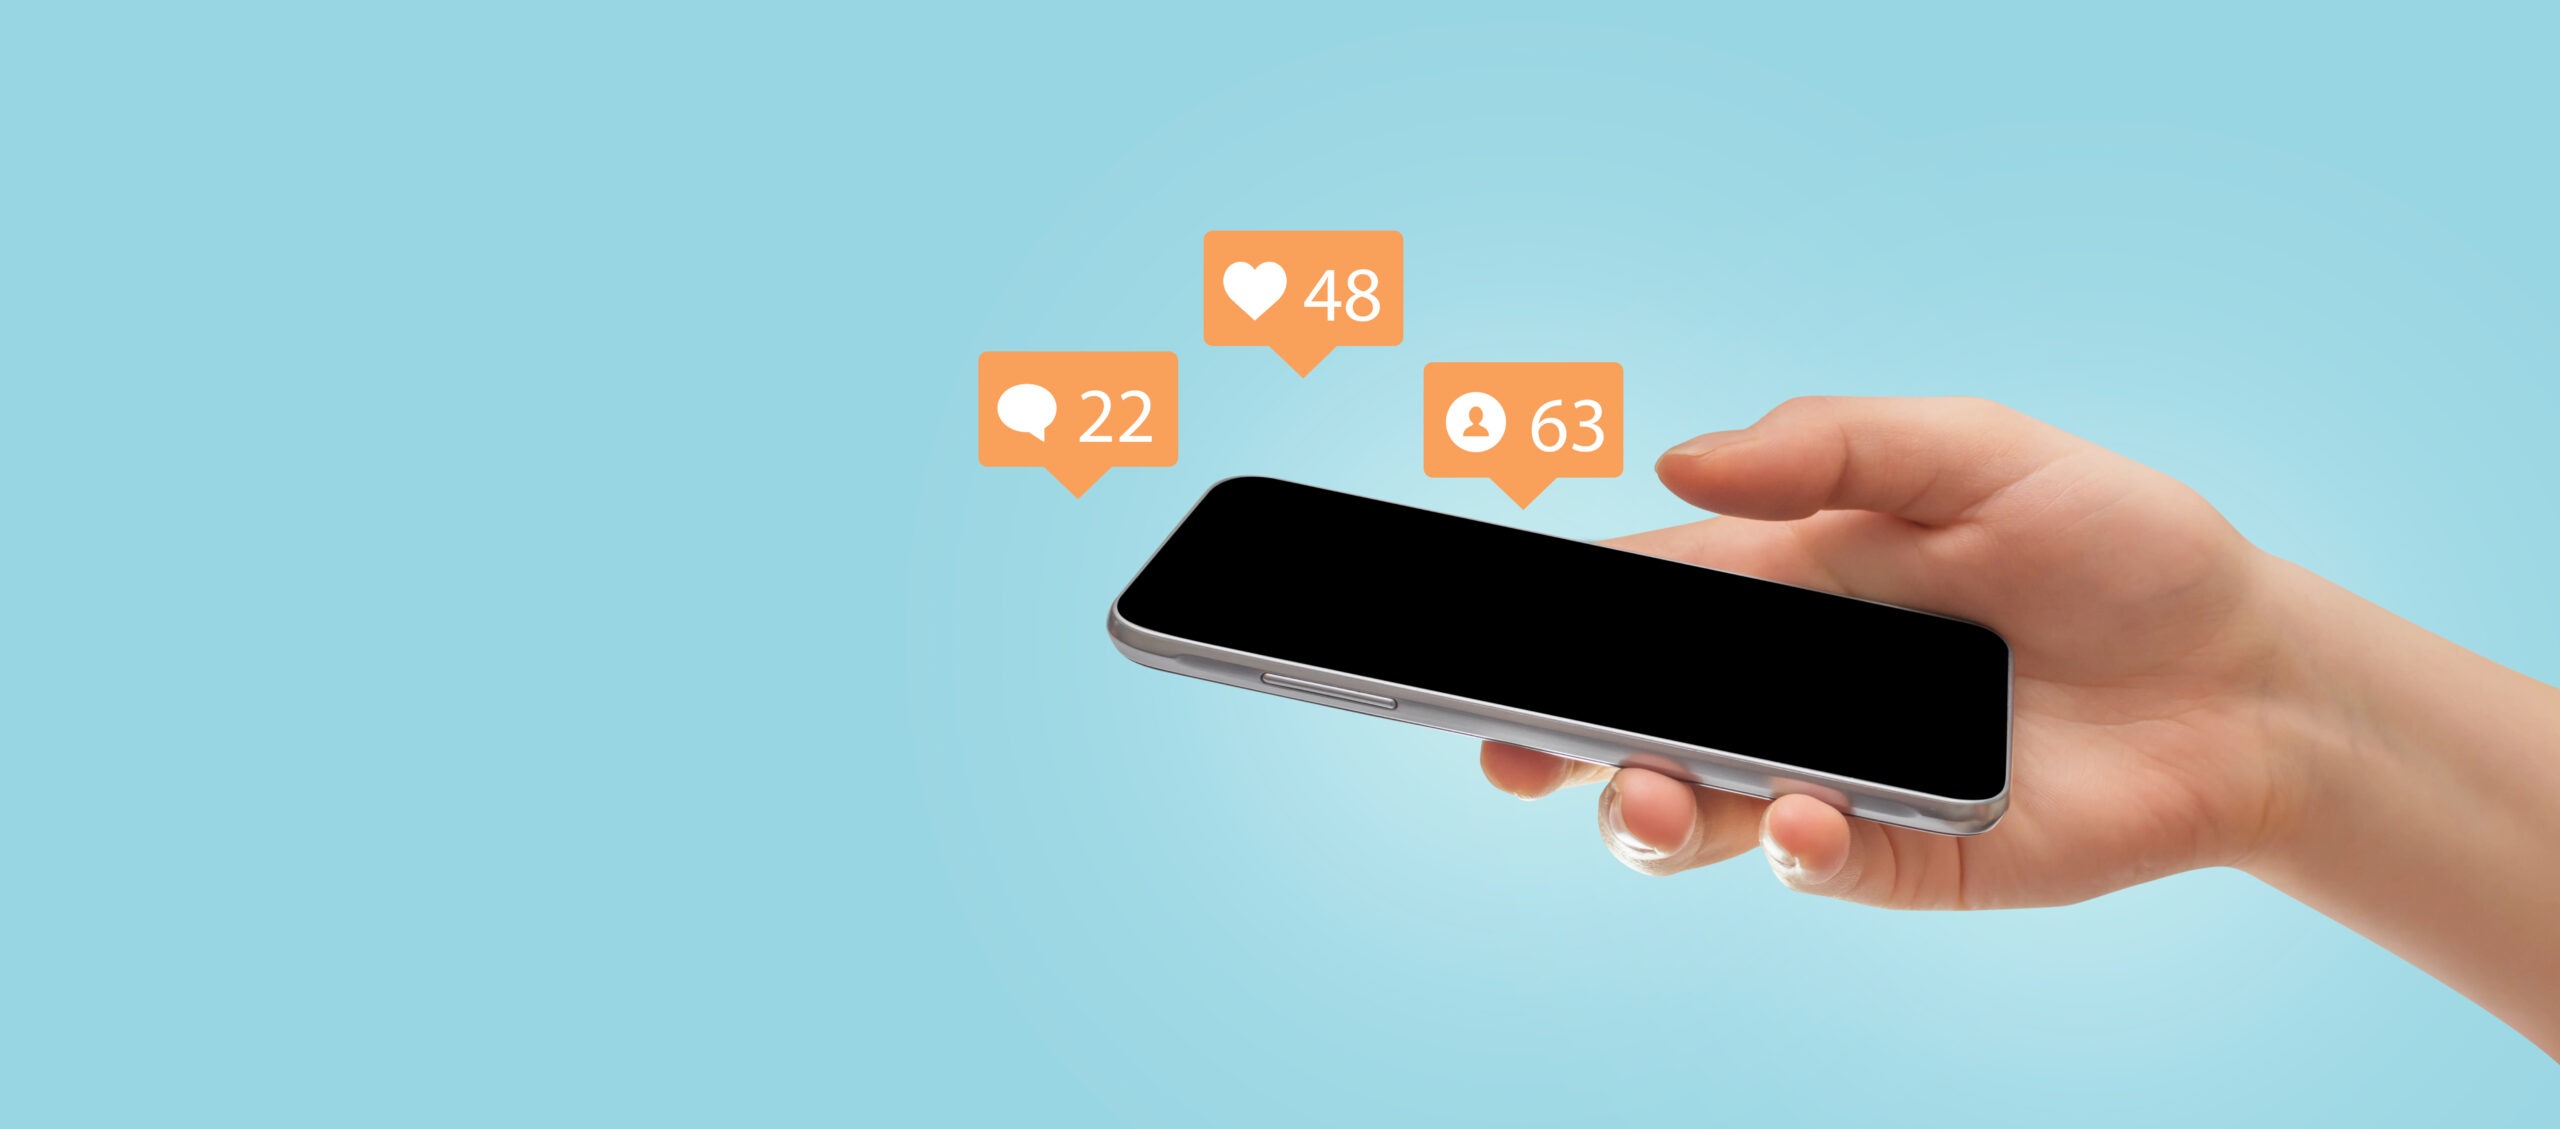 Is social media replacing traditional customer service?